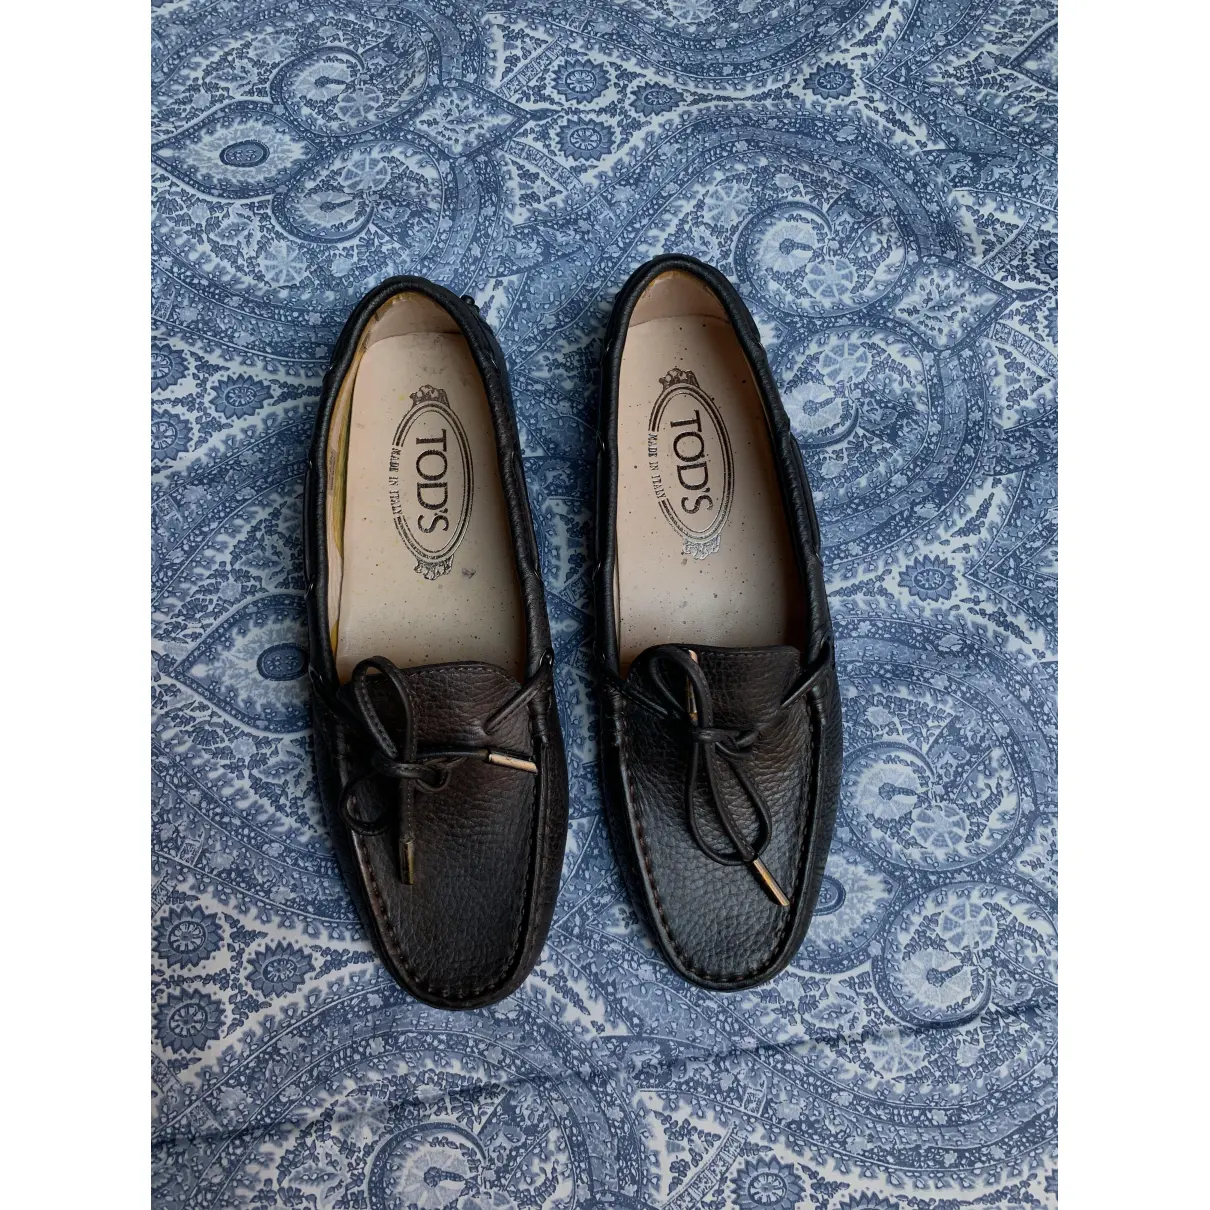 Buy Tod's Gommino leather flats online